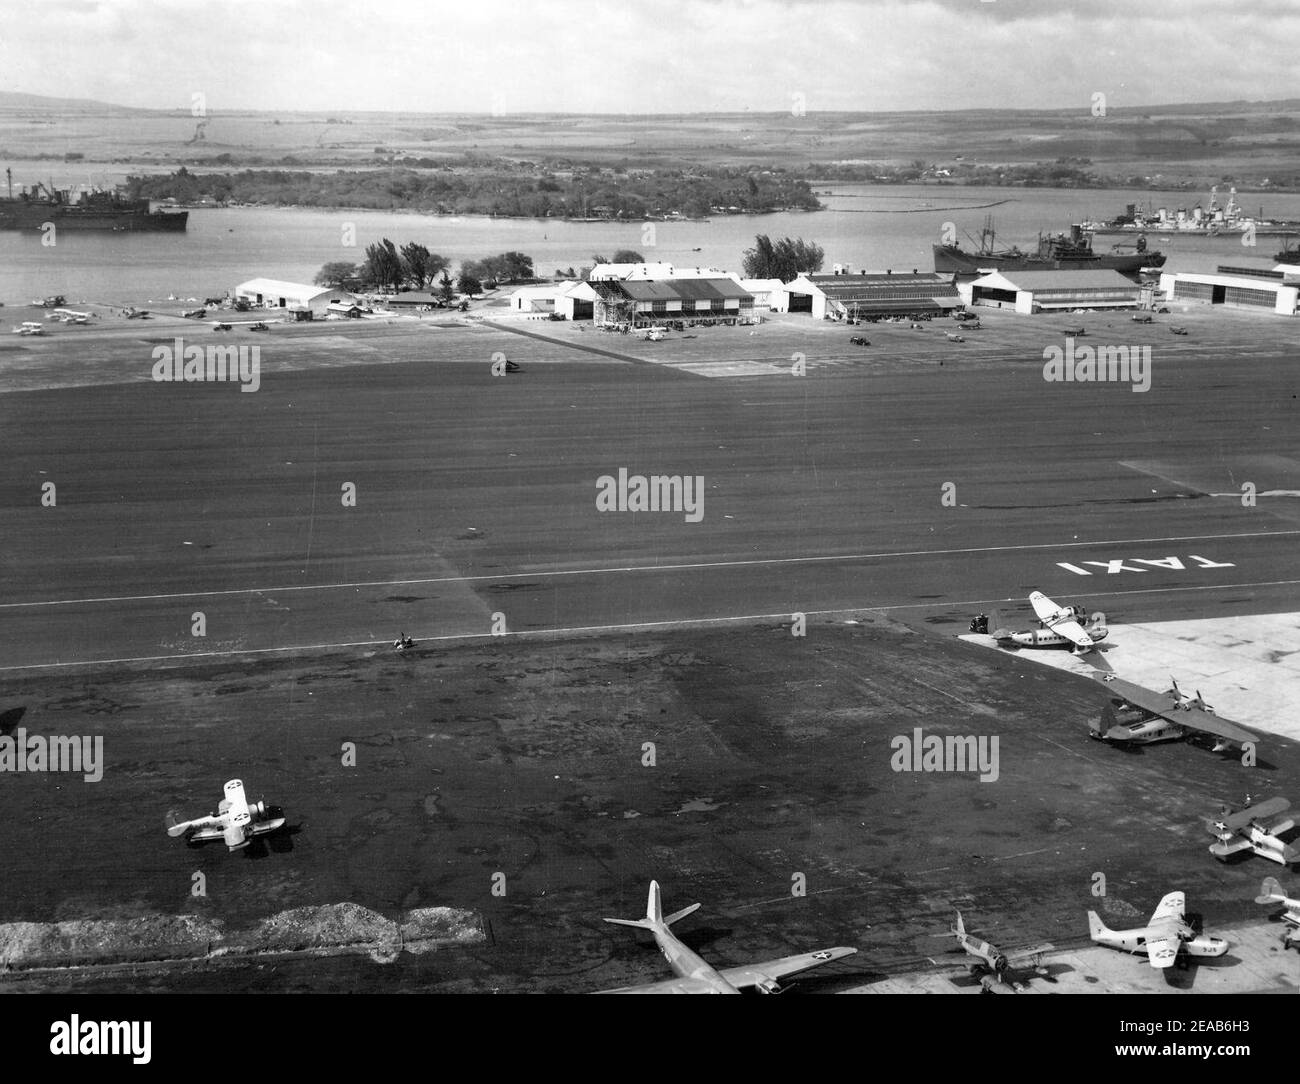 Naval Air Station Ford Island, Pearl Harbor, on 8 December 1941 (NNAM.1996.488.029.066). Stock Photo